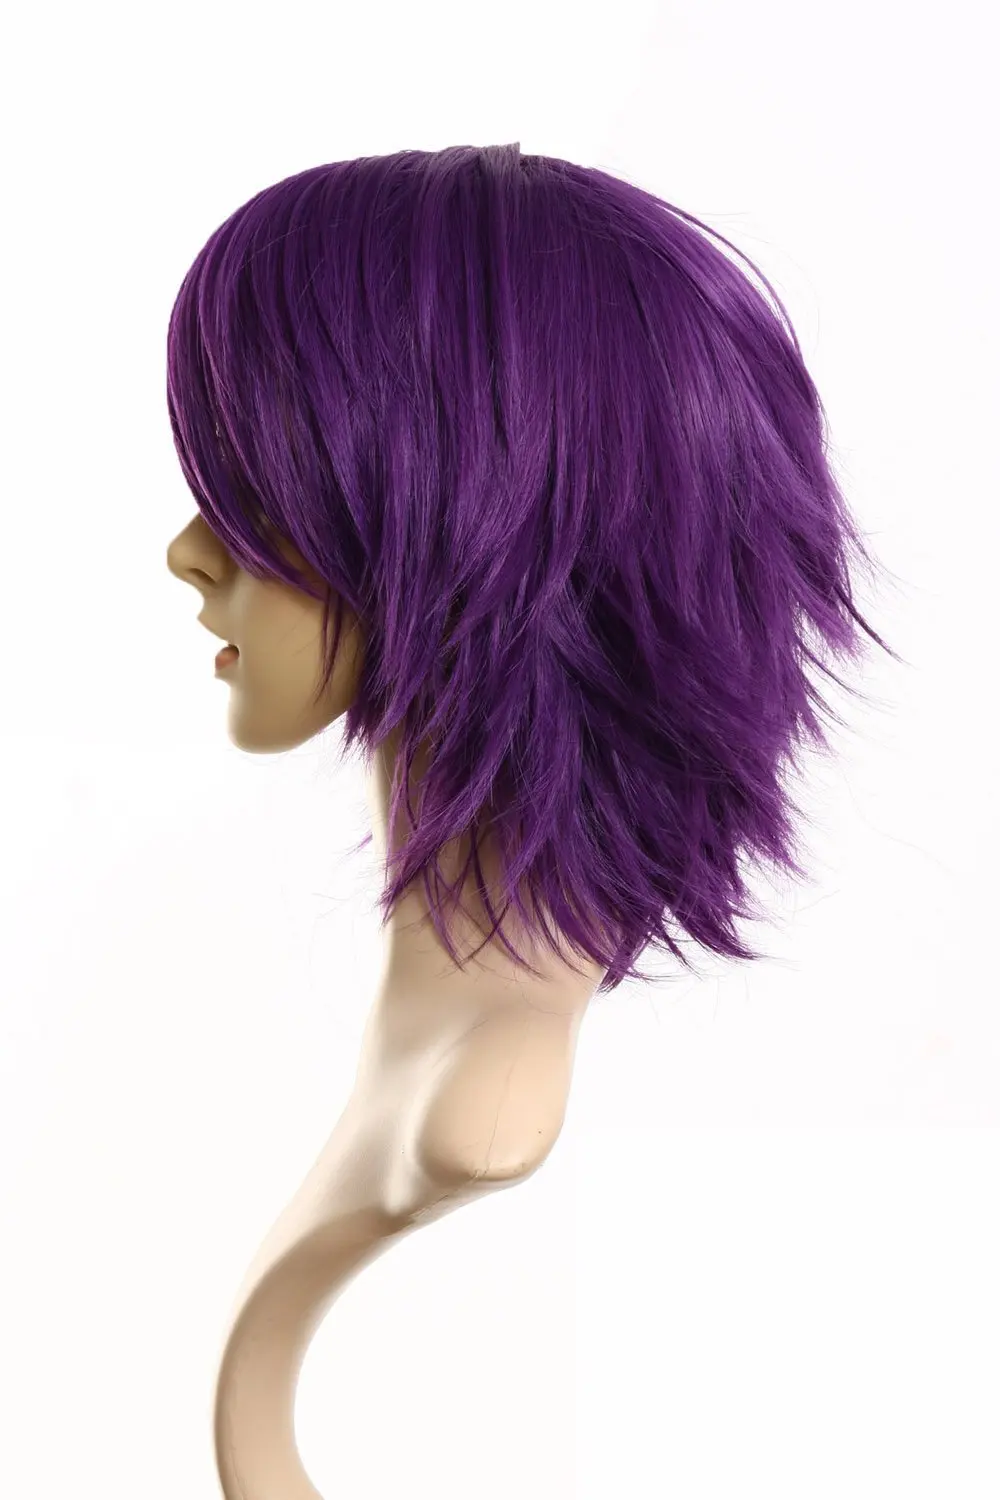 Short Dark Purple Hair Find Your Perfect Hair Style